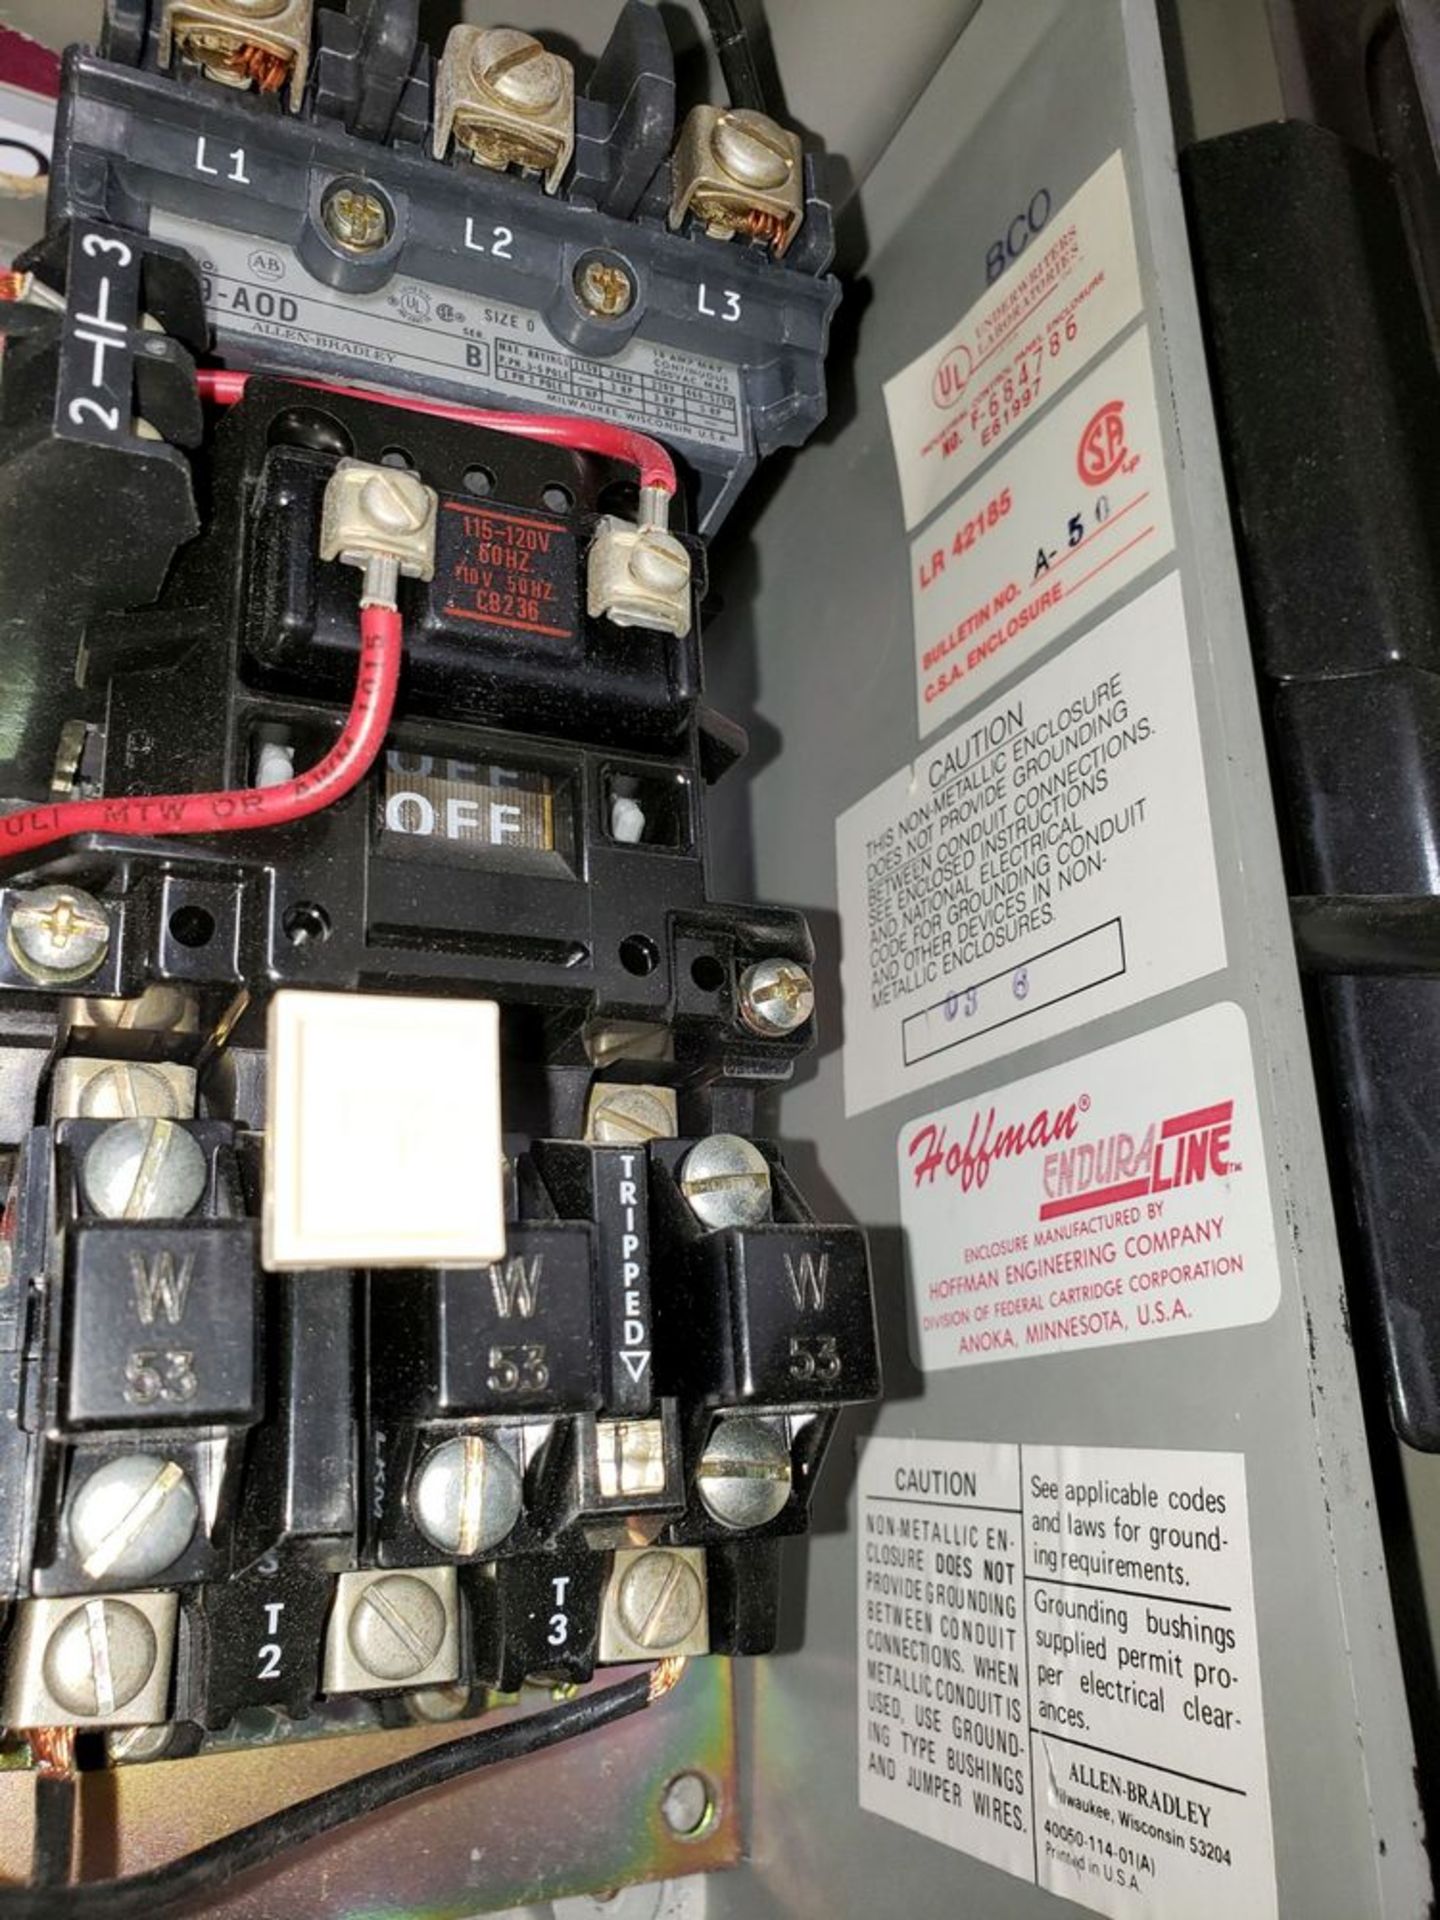 Lot of electrical equipment, consisting of control box, reset button and switches - Image 13 of 16